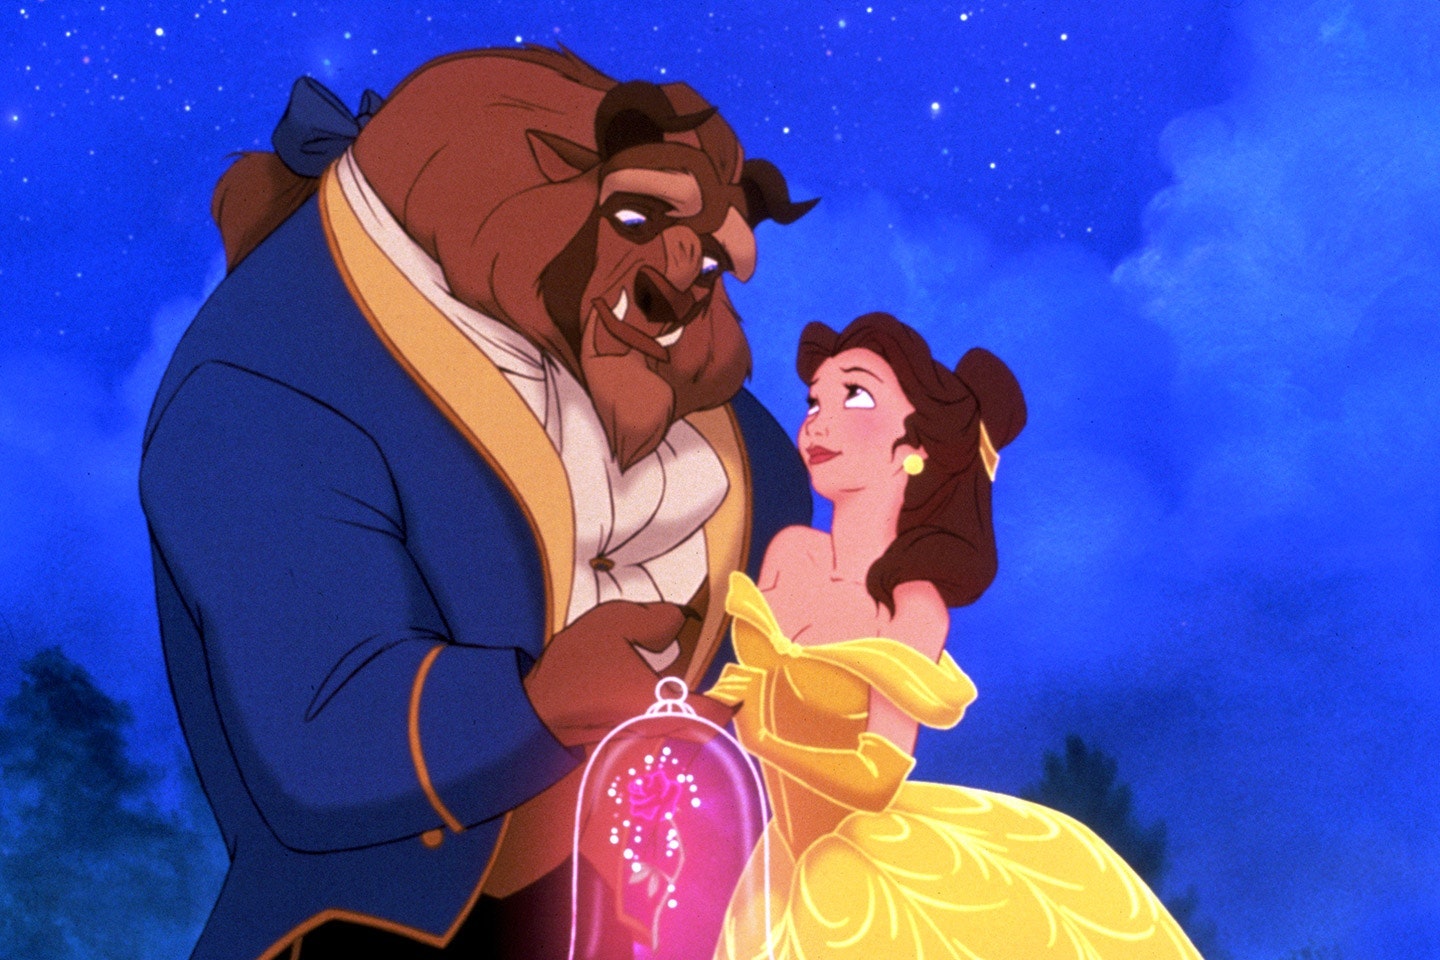 Beauty and the beast. Красавица и чудовище 1991. Красавица и чудовище 1991 чудовище. Красавица и чудовище мультфильм 1991. Красавица и чудовище - Beauty and the Beast (1991).